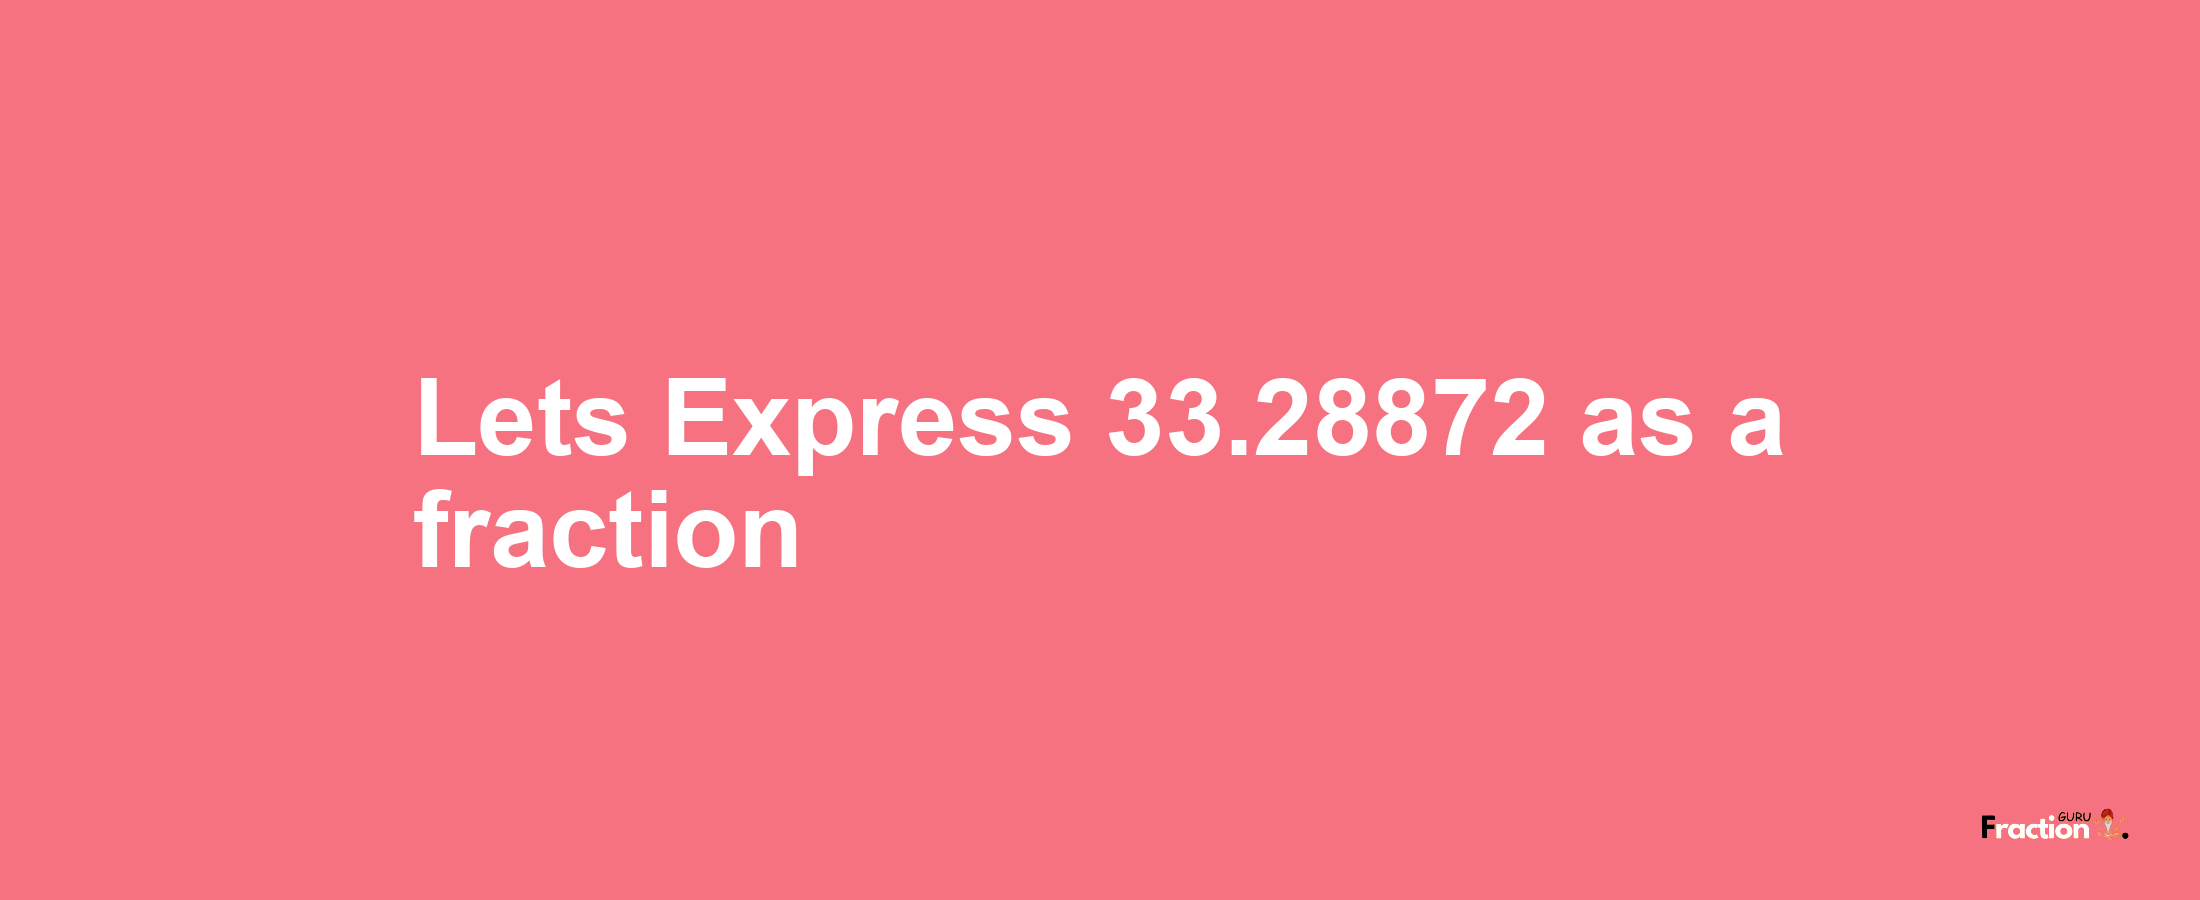 Lets Express 33.28872 as afraction